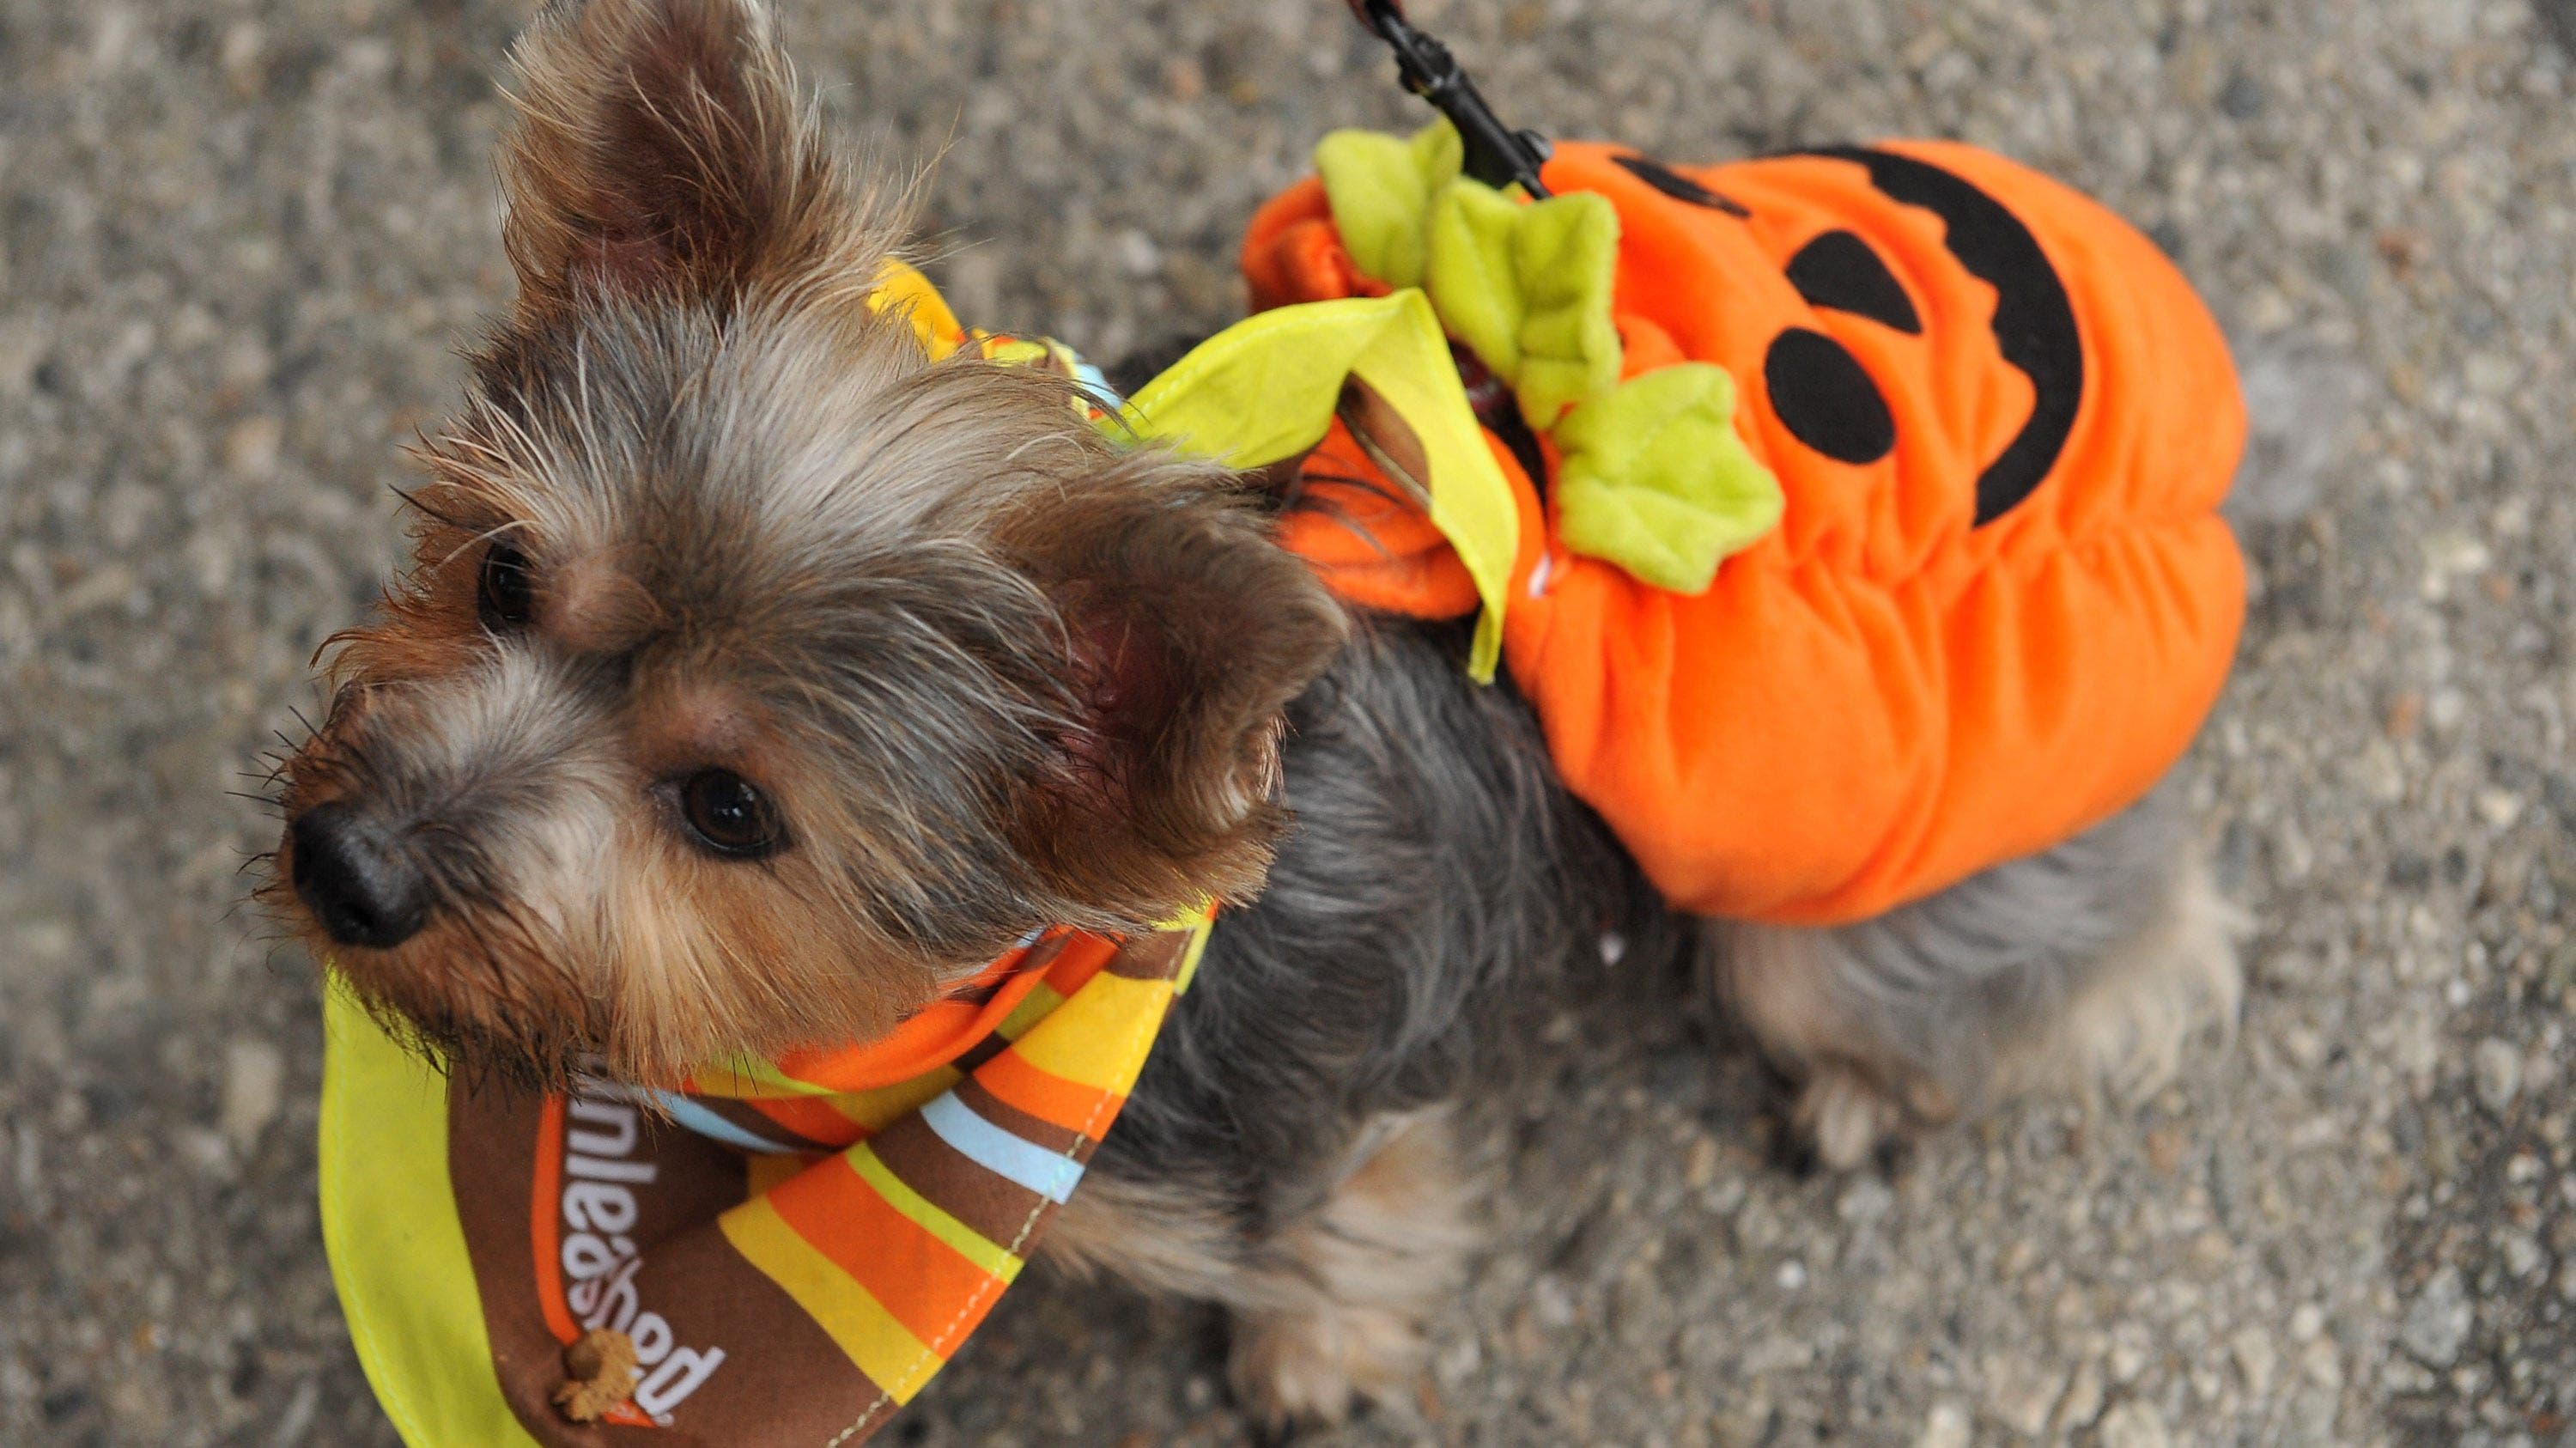 The Modern K9 - HALLOWEEN COSTUME CONTEST!! 🎃👻 Share your pooches in  their best costume and post them in the comments on this post. Please  include your dog's name, breed and what